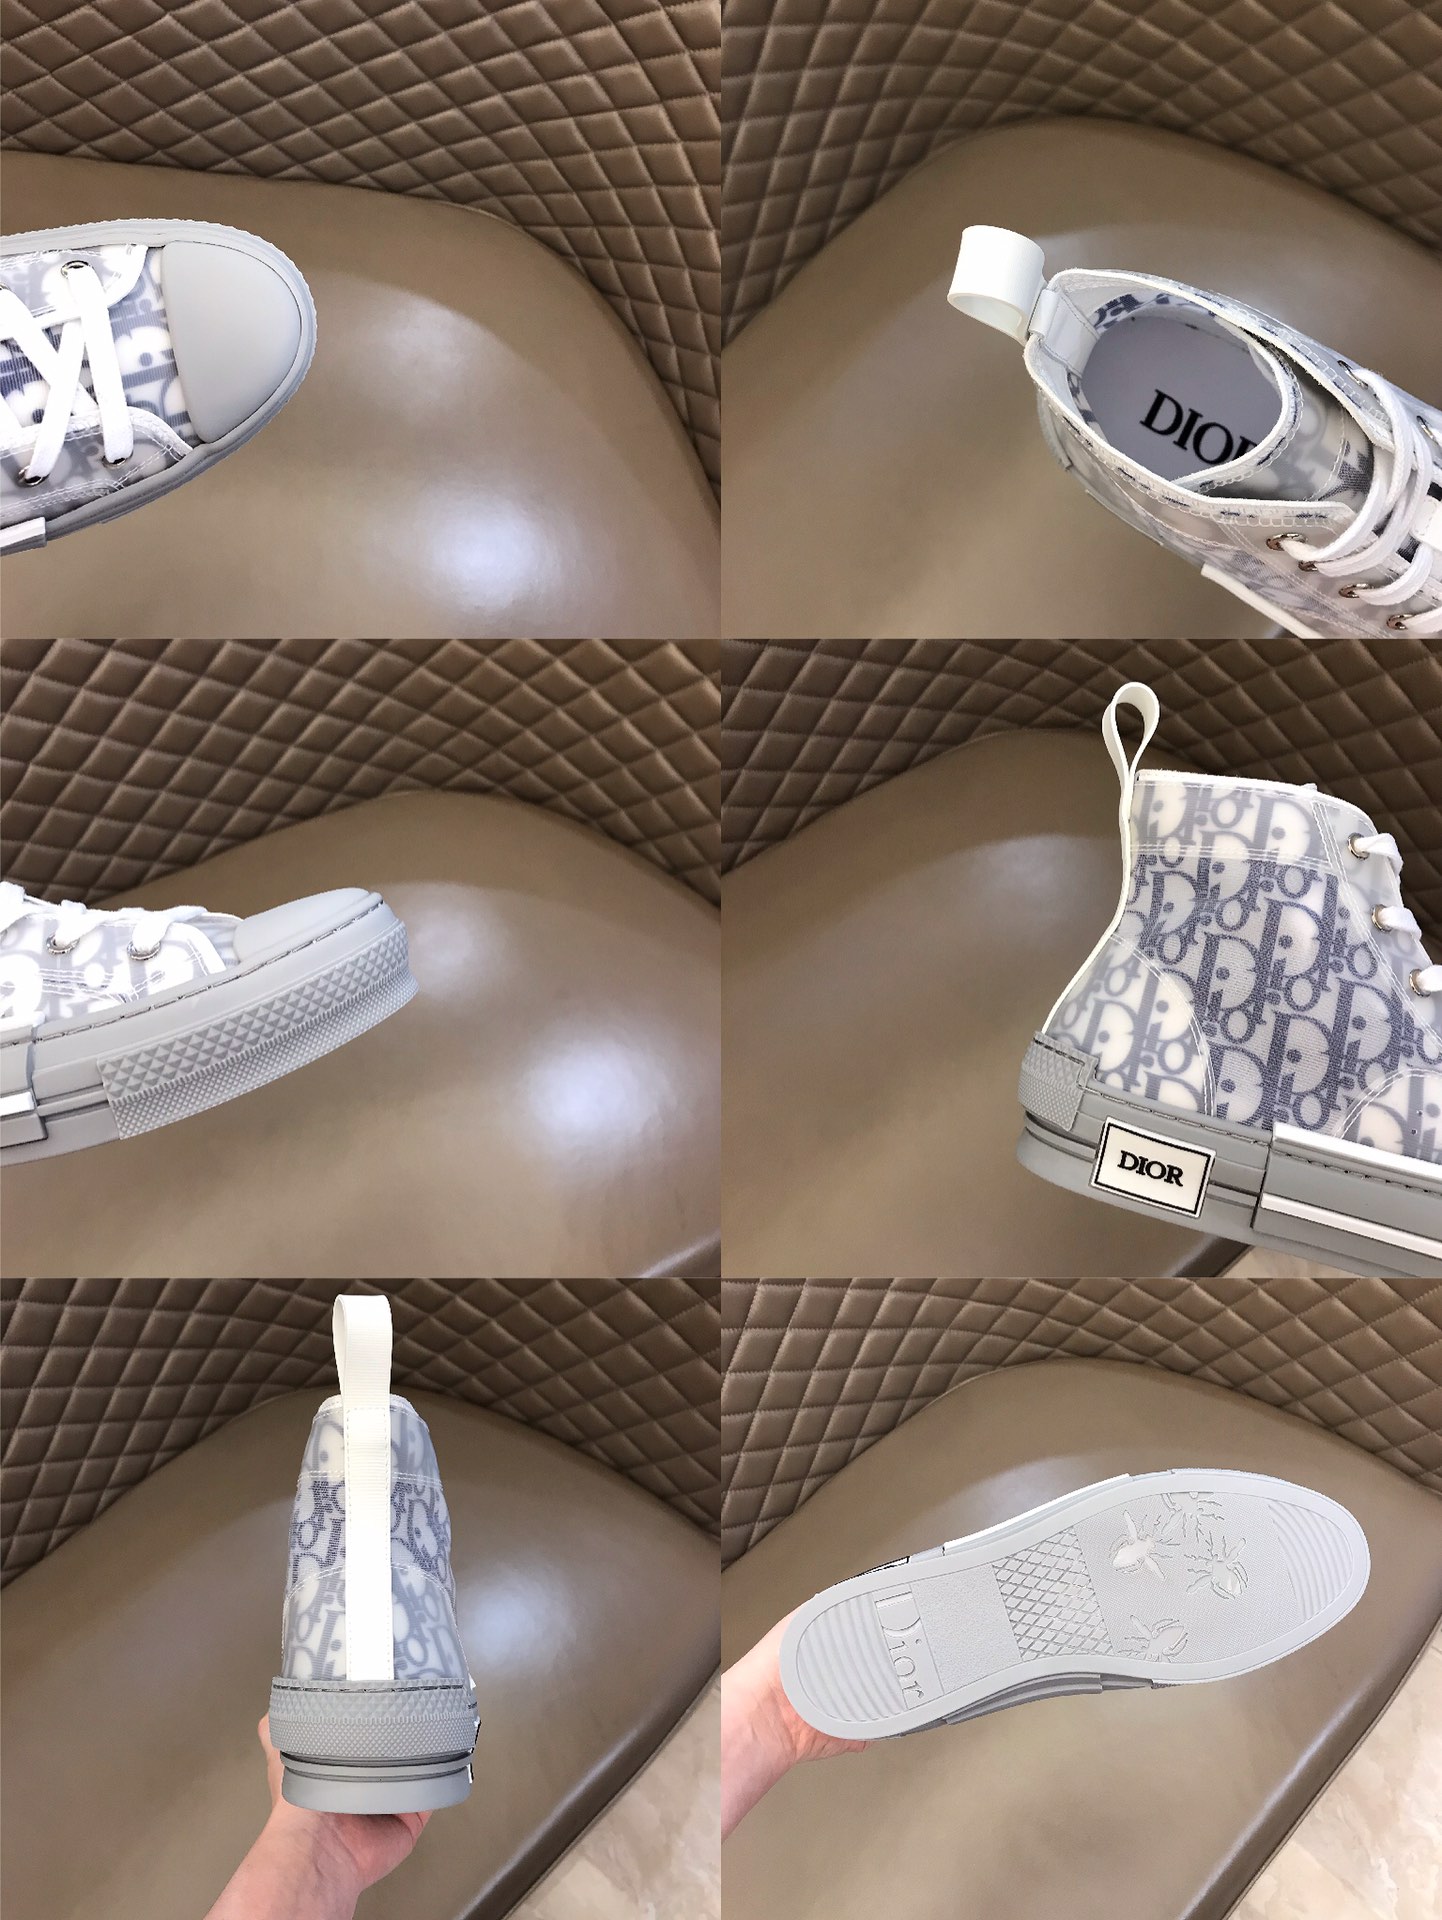 Dior Sneaker B23 in Gray with Blue Logo high